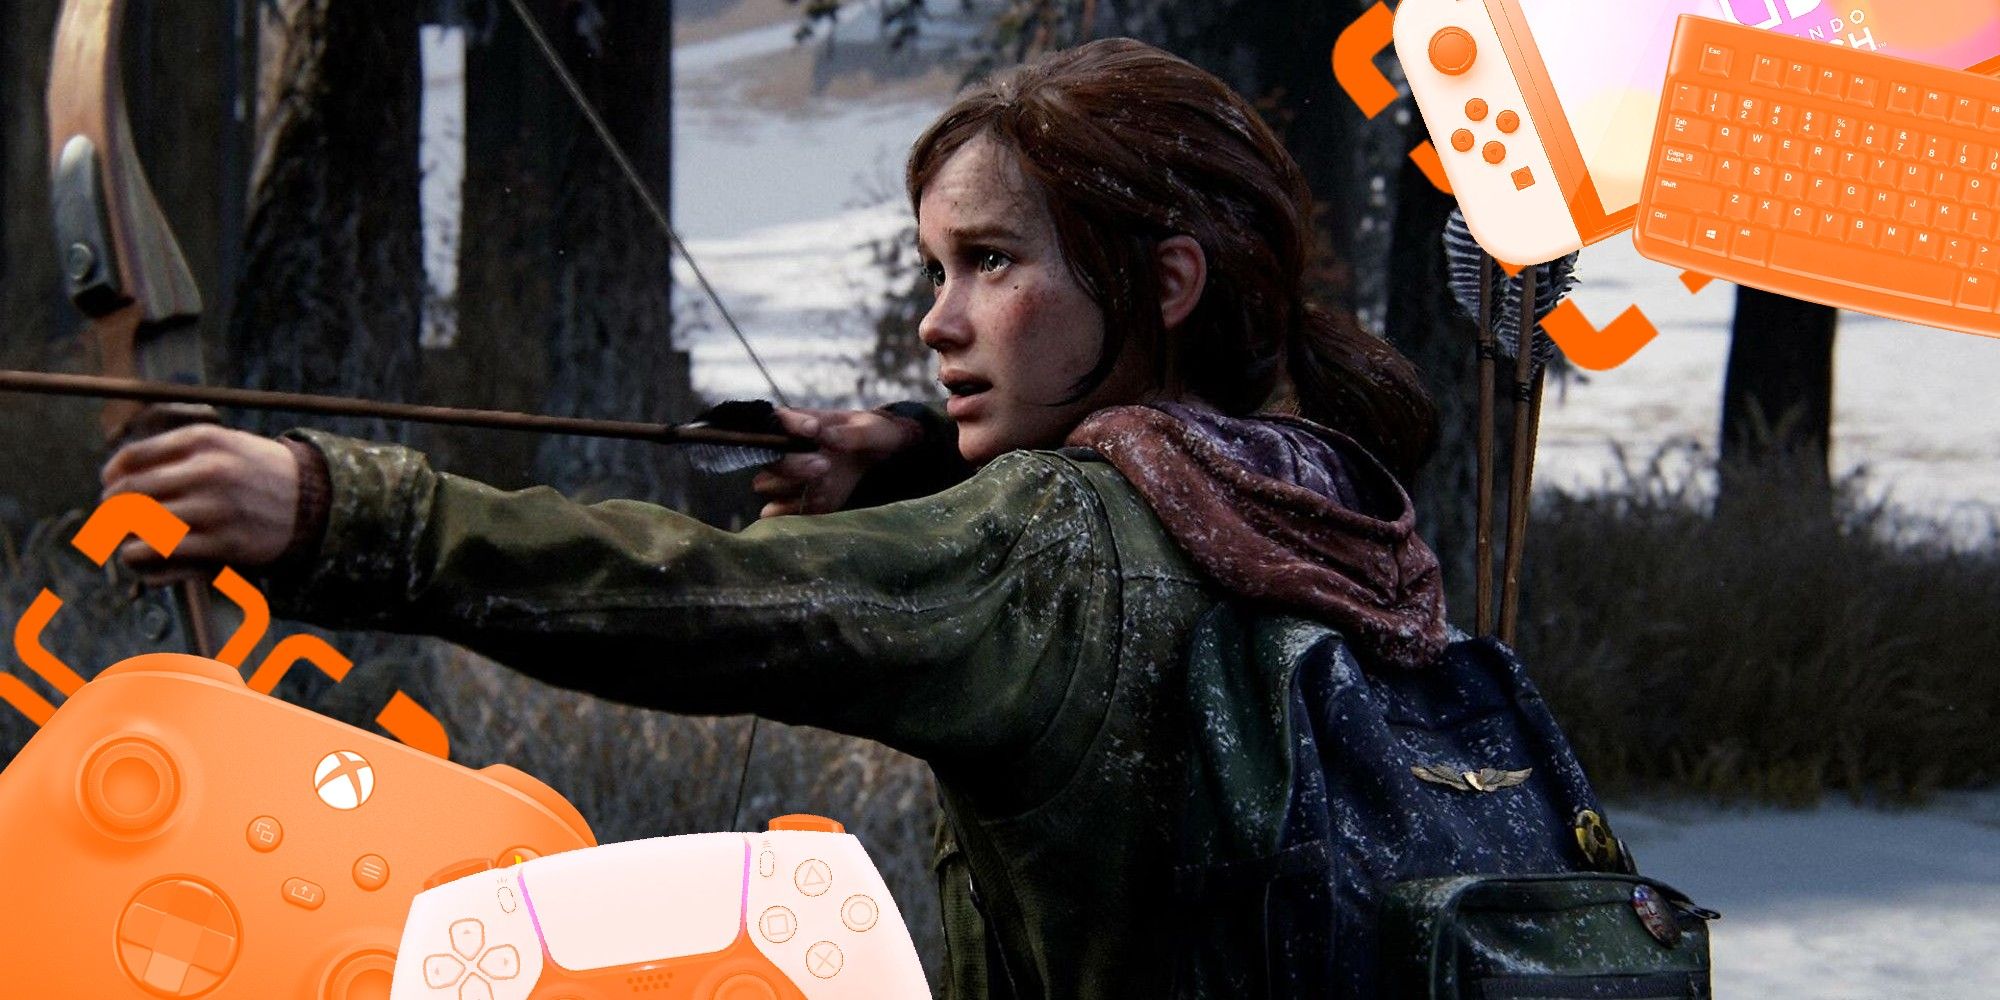 Ellie drawing her bow in The Last of Us Part 1, with controllers added to the image.